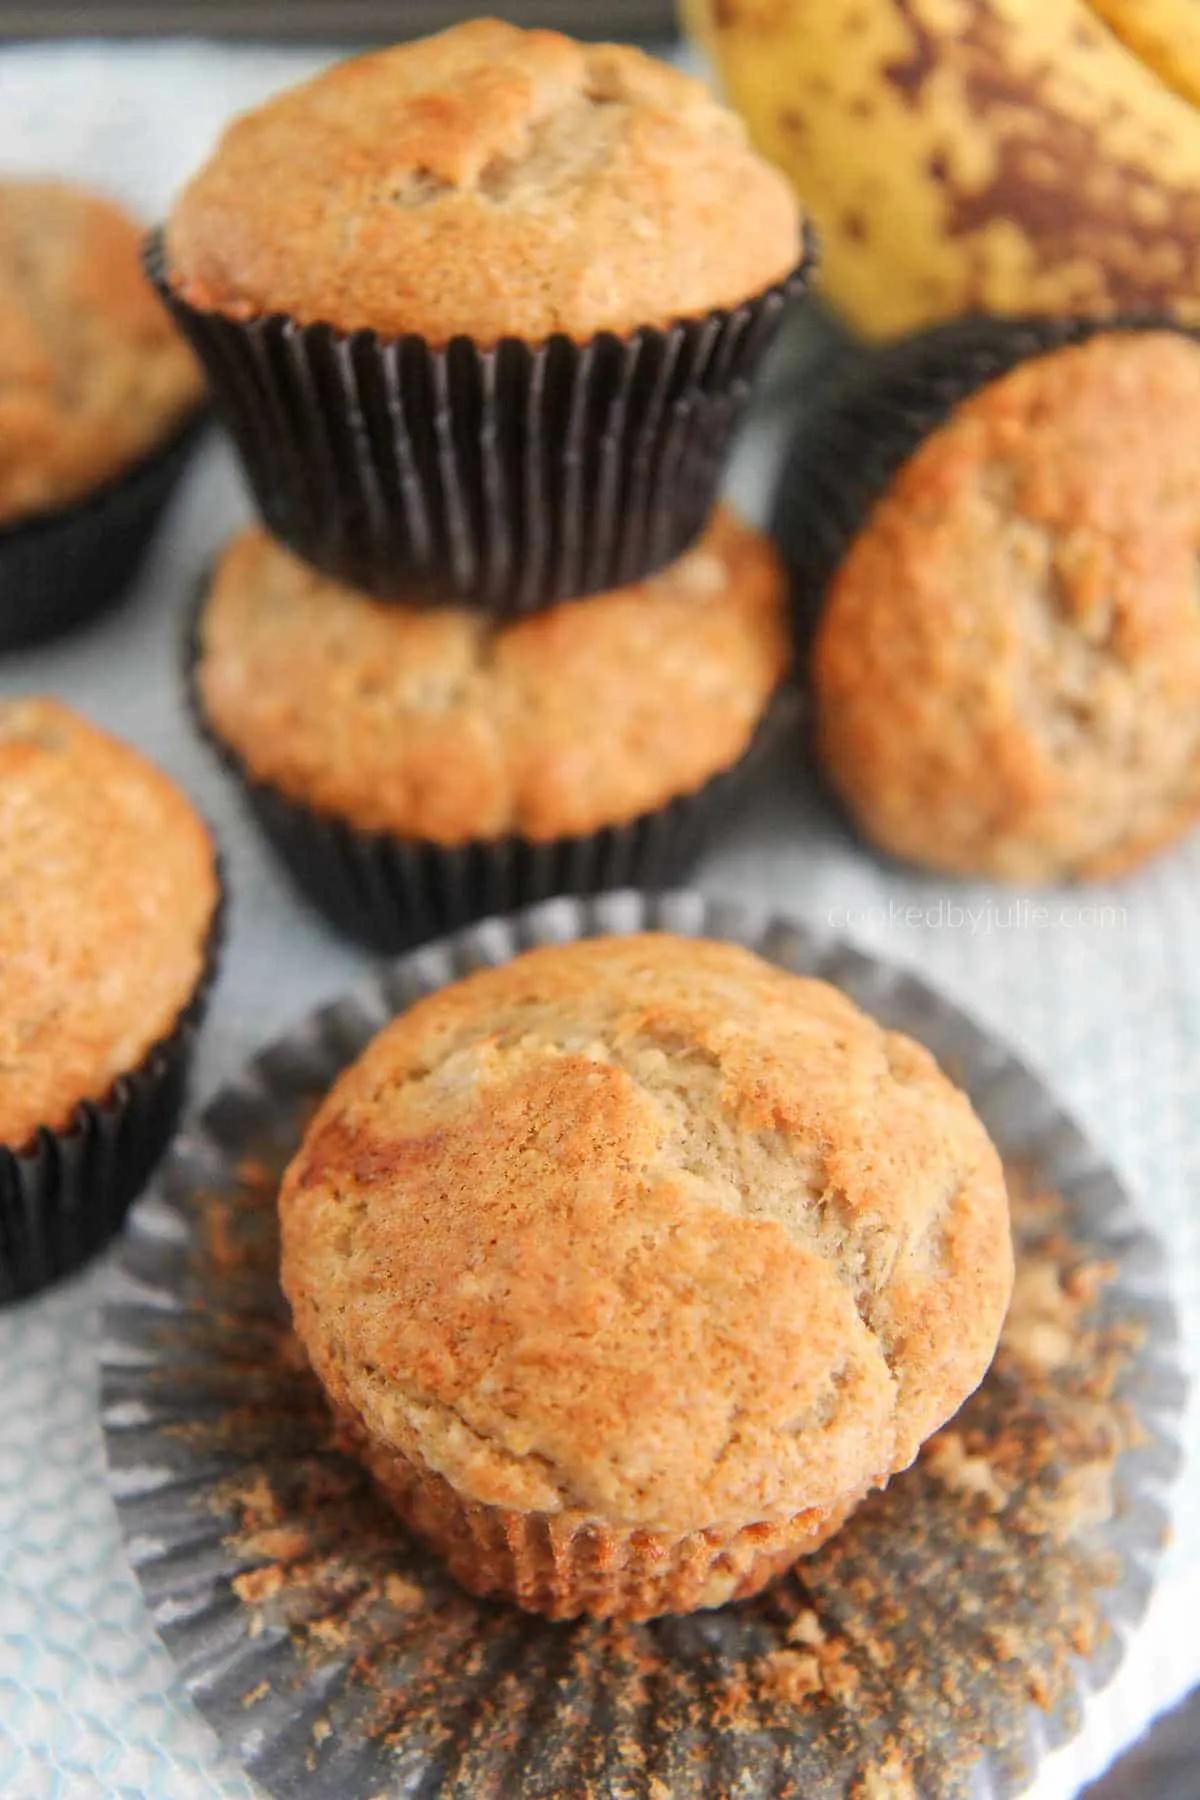 Soft and Moist Banana Muffins - Cooked by Julie